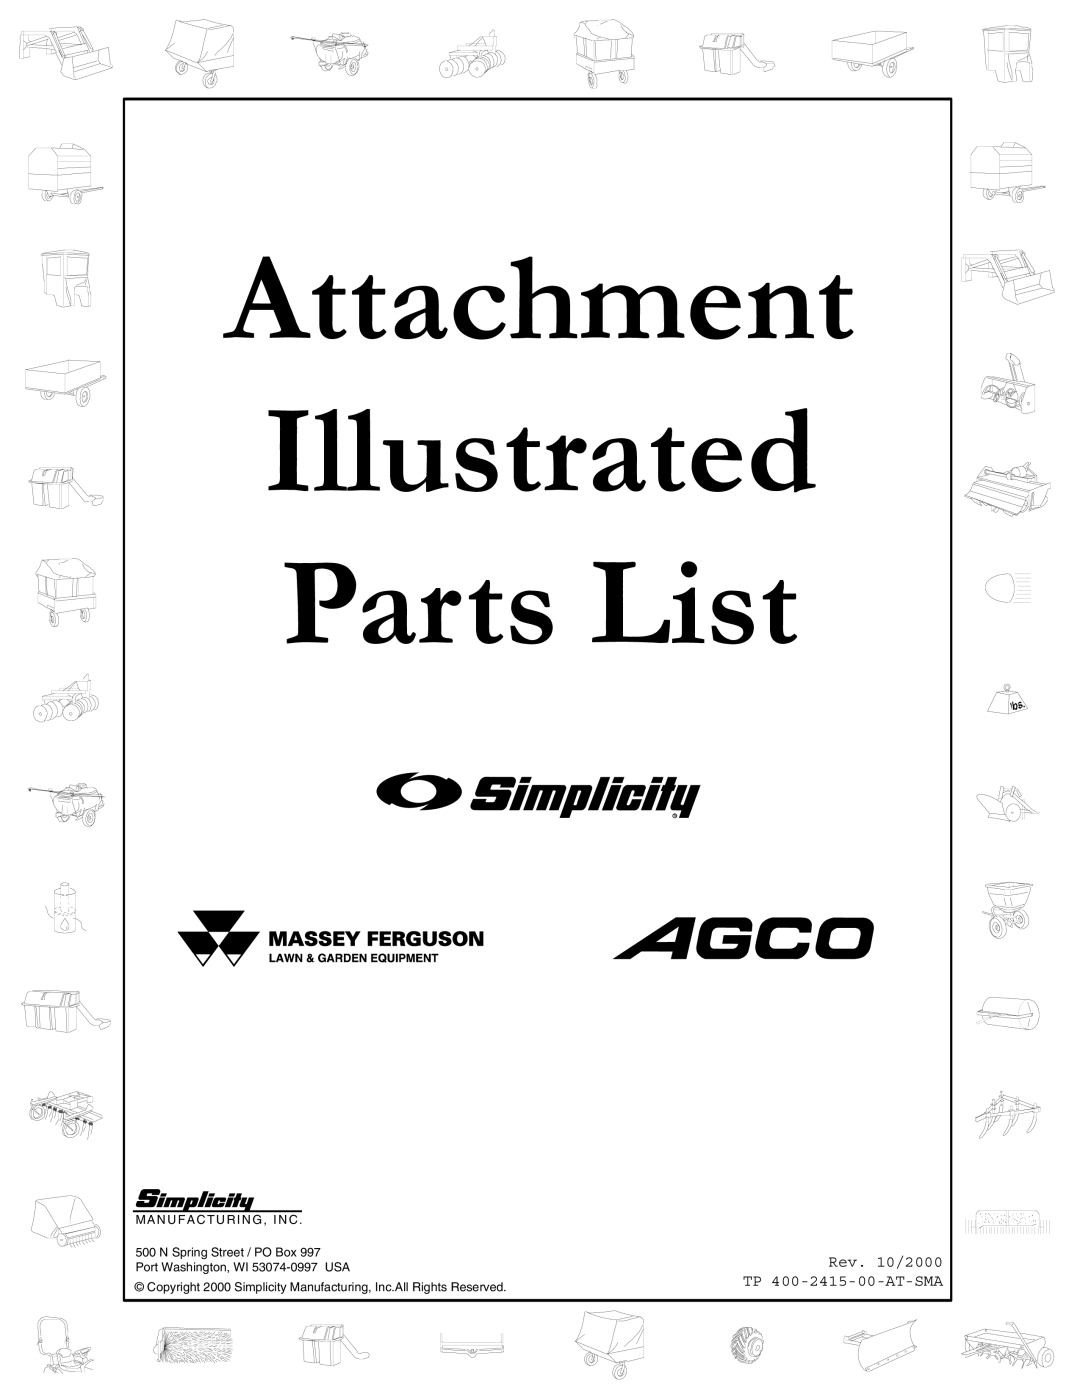 Snapper manual Attachment Illustrated Parts List, Rev. 10/2000 TP 400-2415-00-AT-SMA 